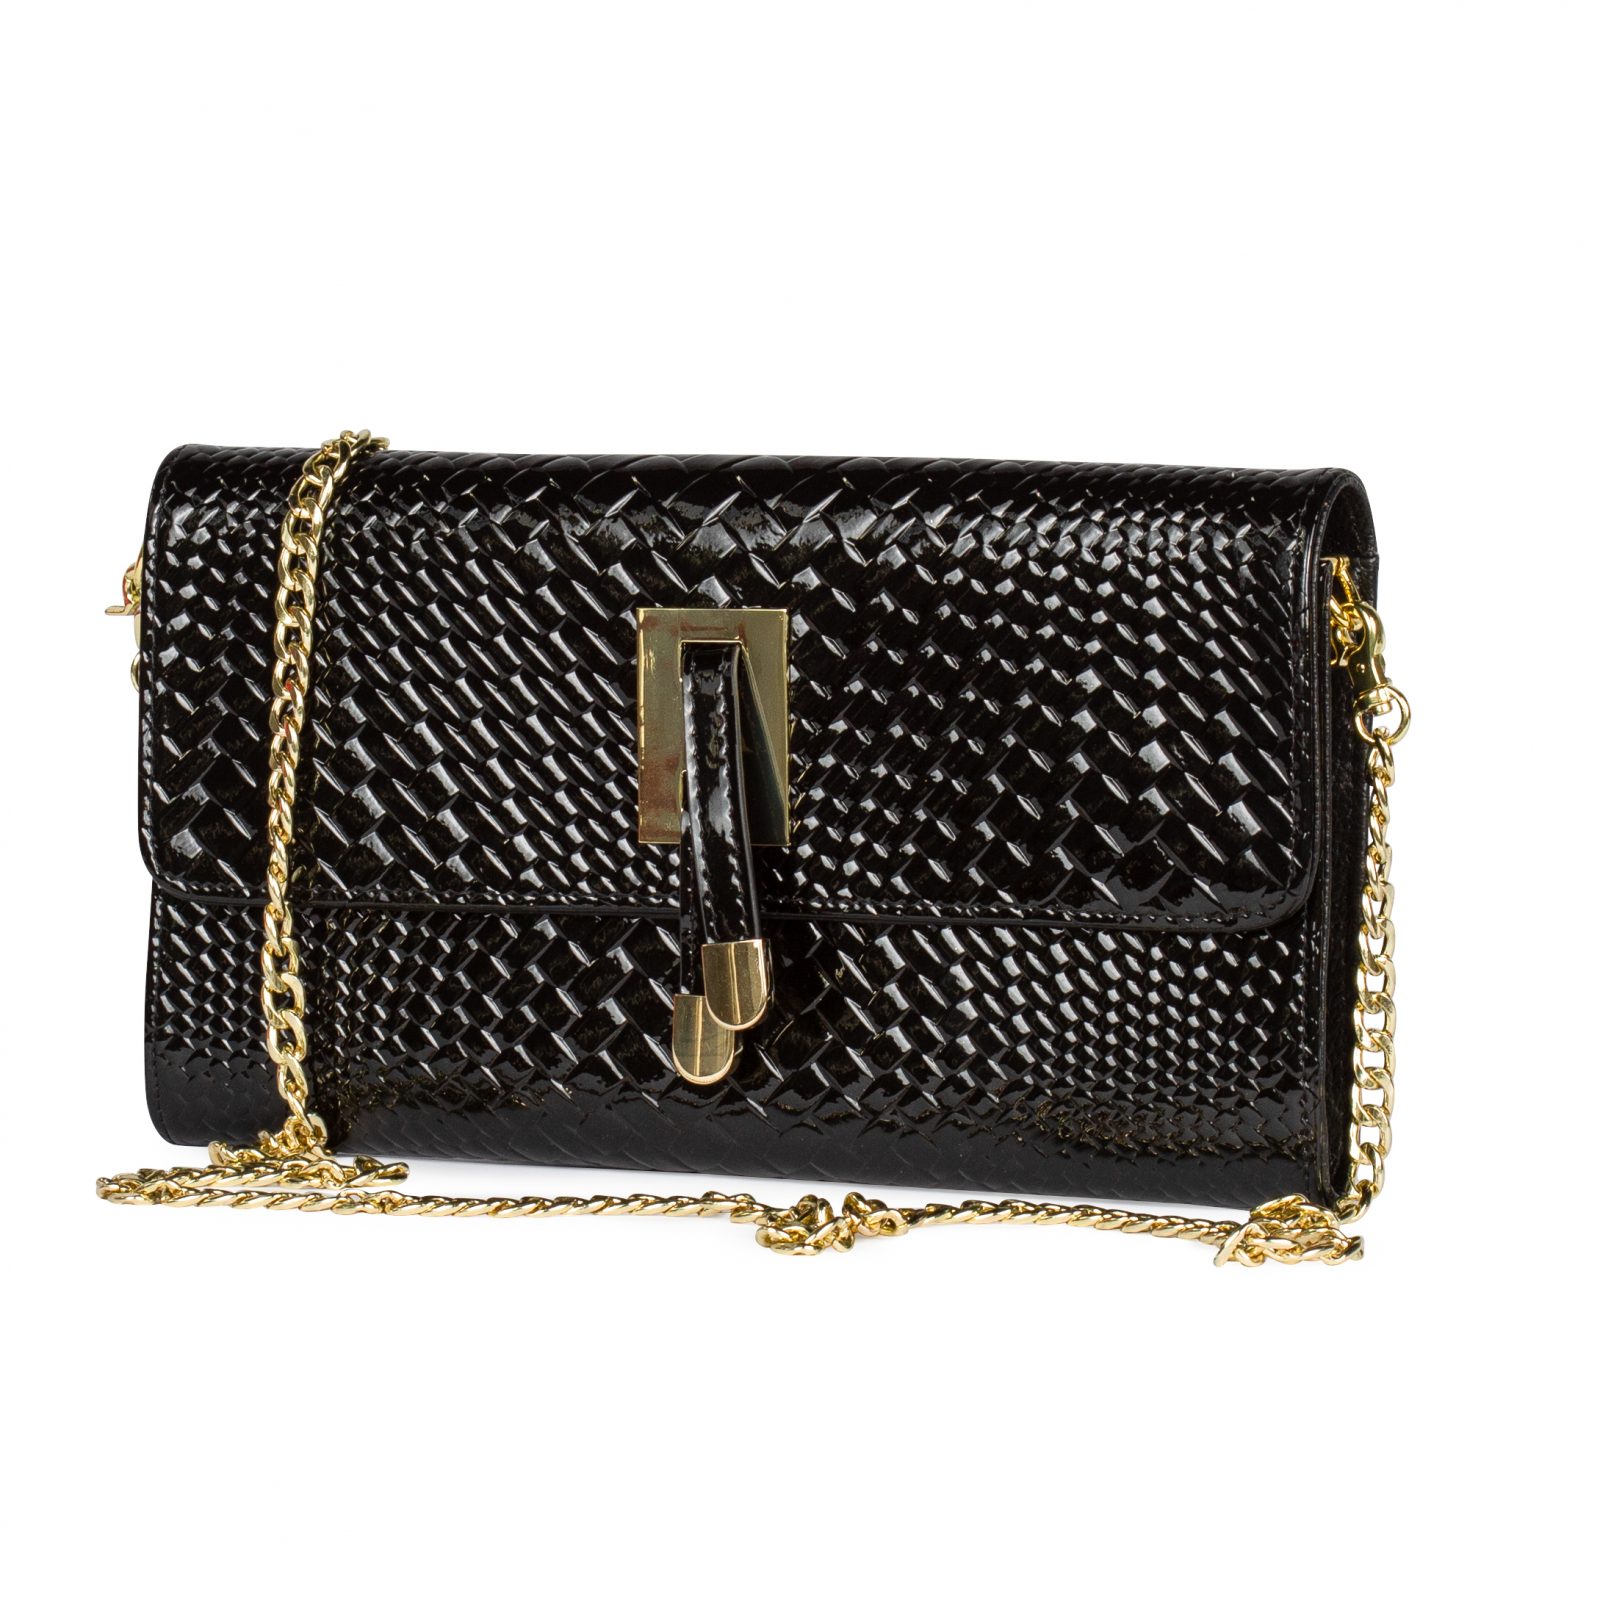 EMBOSSED-LEATHER EVENING BAG BEAUTIFUL BLACK – CHICZ